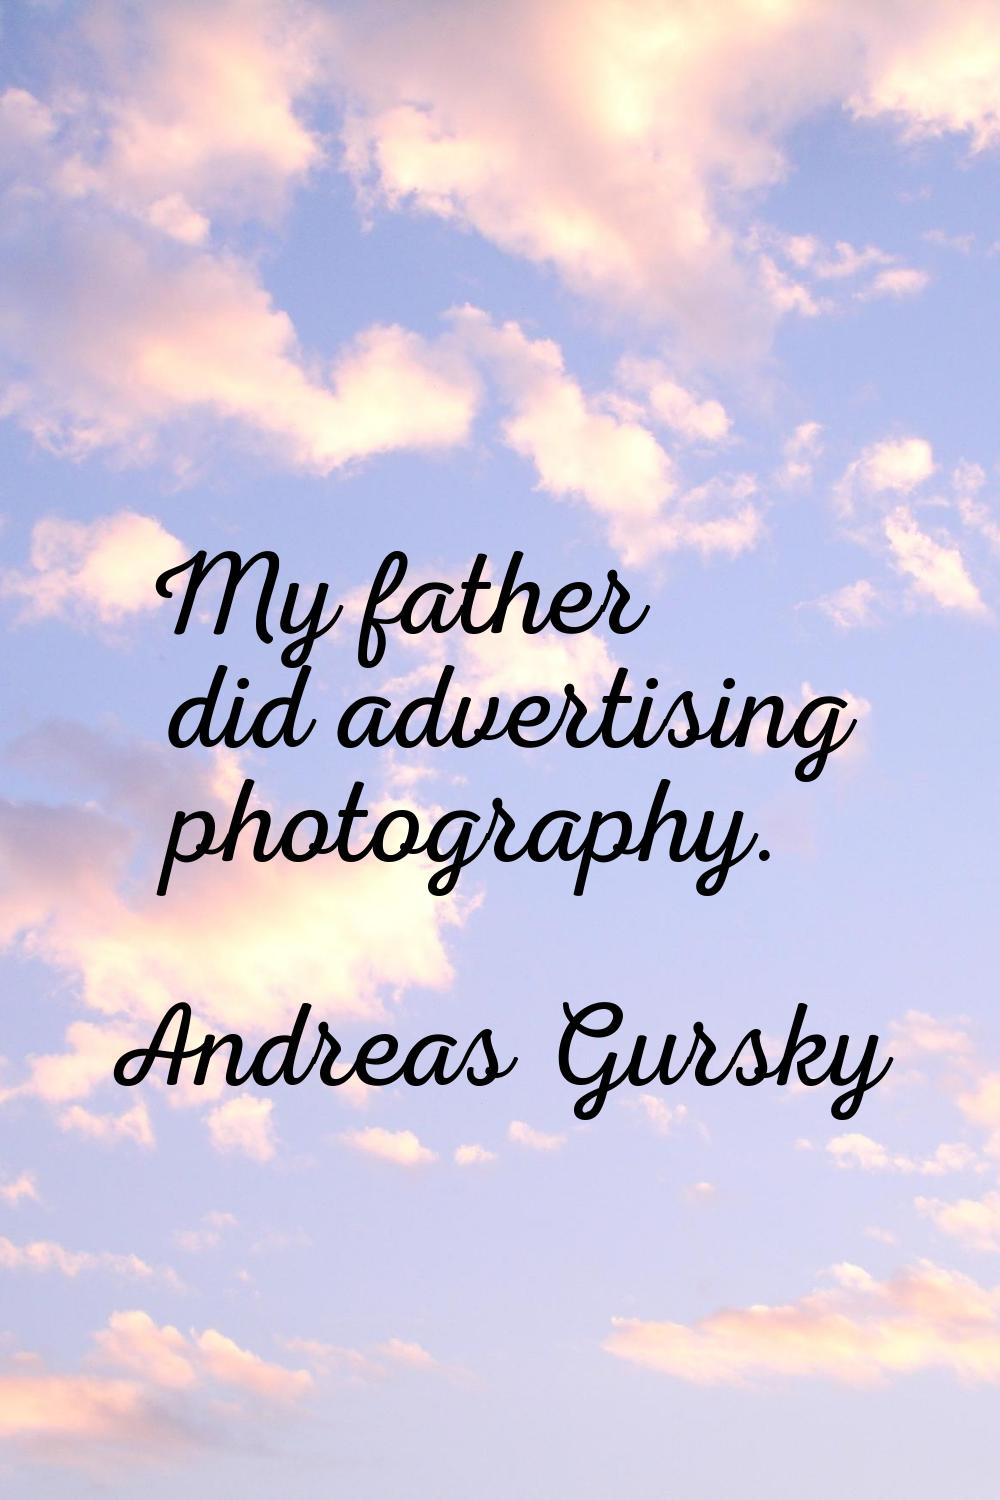 My father did advertising photography.